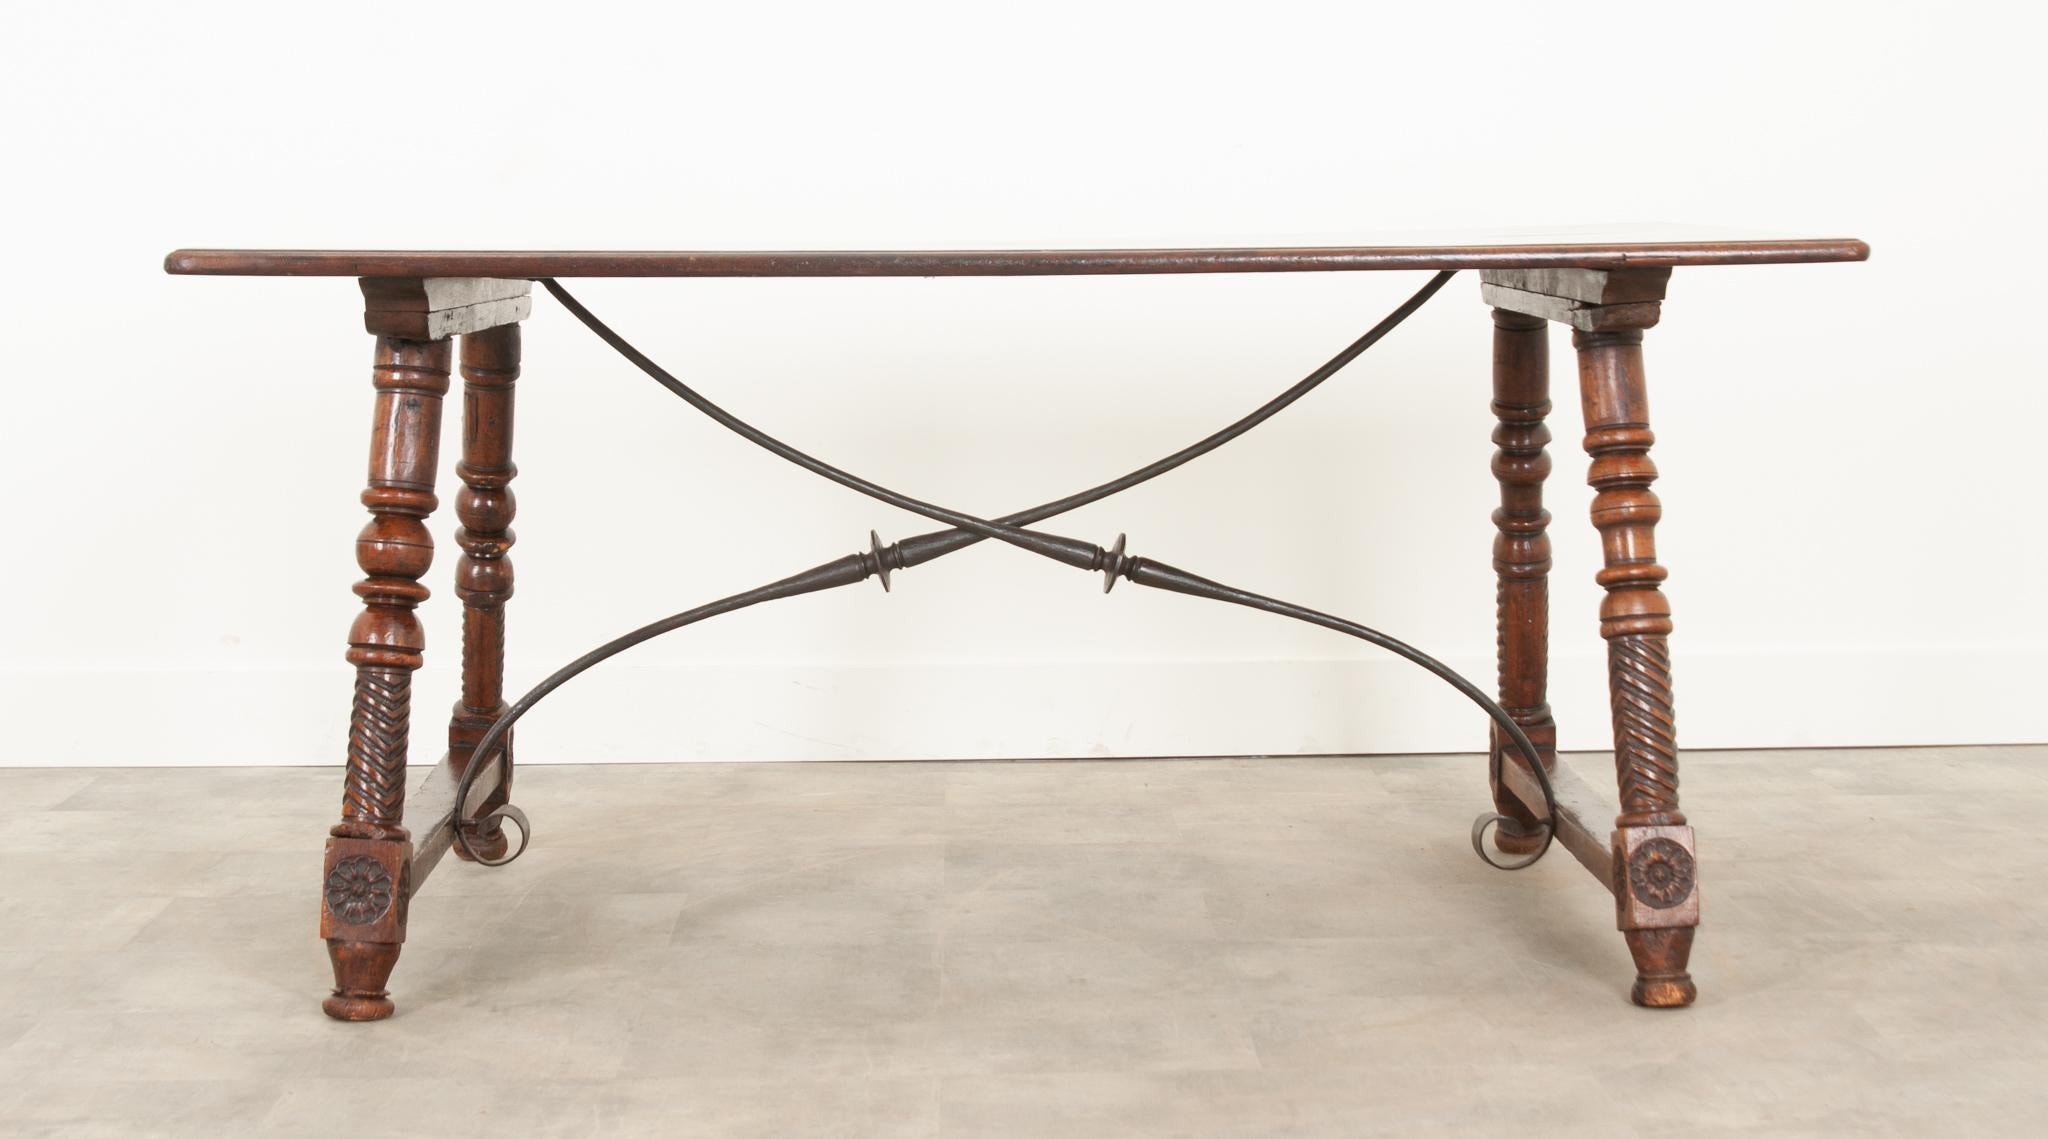 This wonderful Spanish trestle table was handcrafted in the 1700’s and has gained a fantastic patina. The single board, molded edge top is a quality not often found today. Turned legs with amazing carved details support the top and connect with a